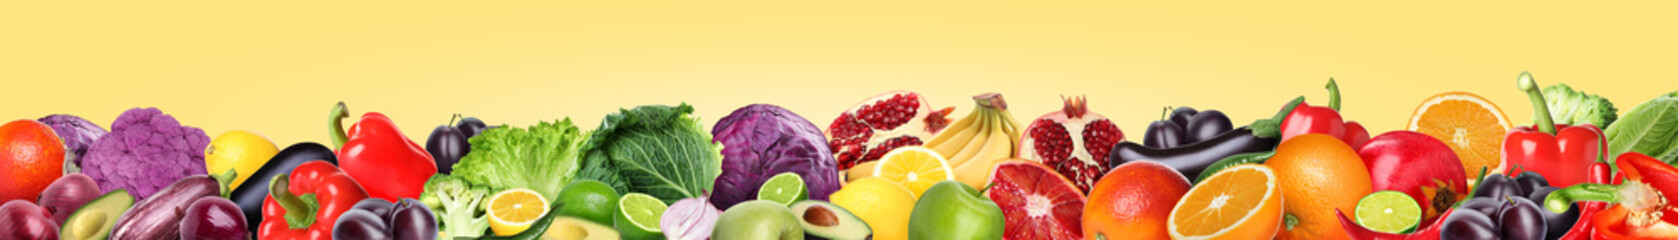 Many different fresh fruits and vegetables on pale light yellow background. Banner design